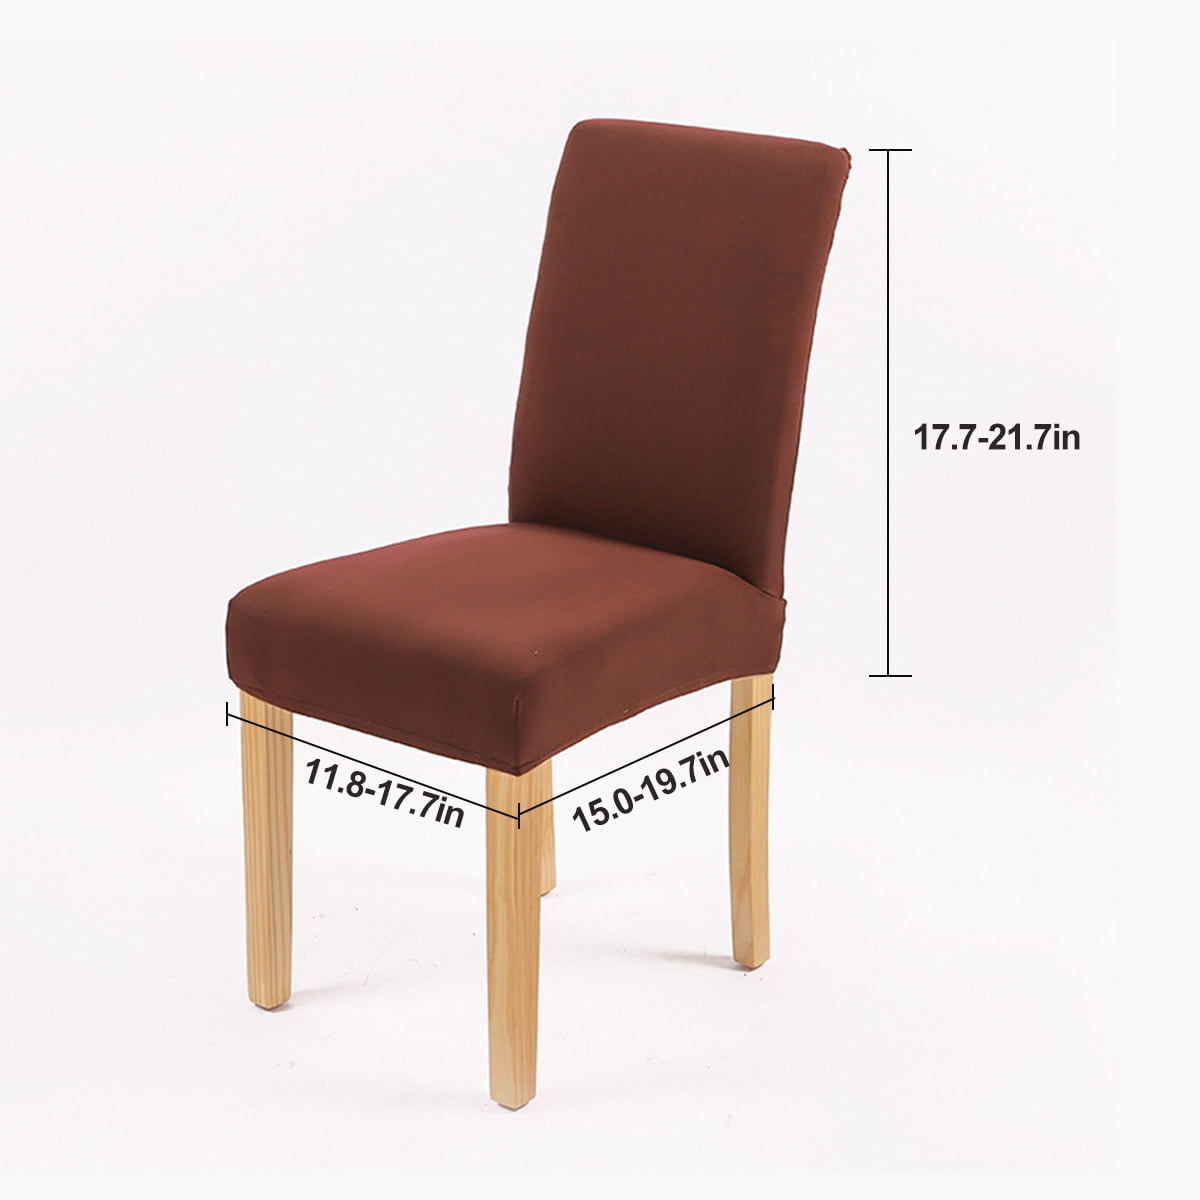 Details about   Elastic Kitchen Dining Chair Covers Covers Slipcovers Chair Protective* 